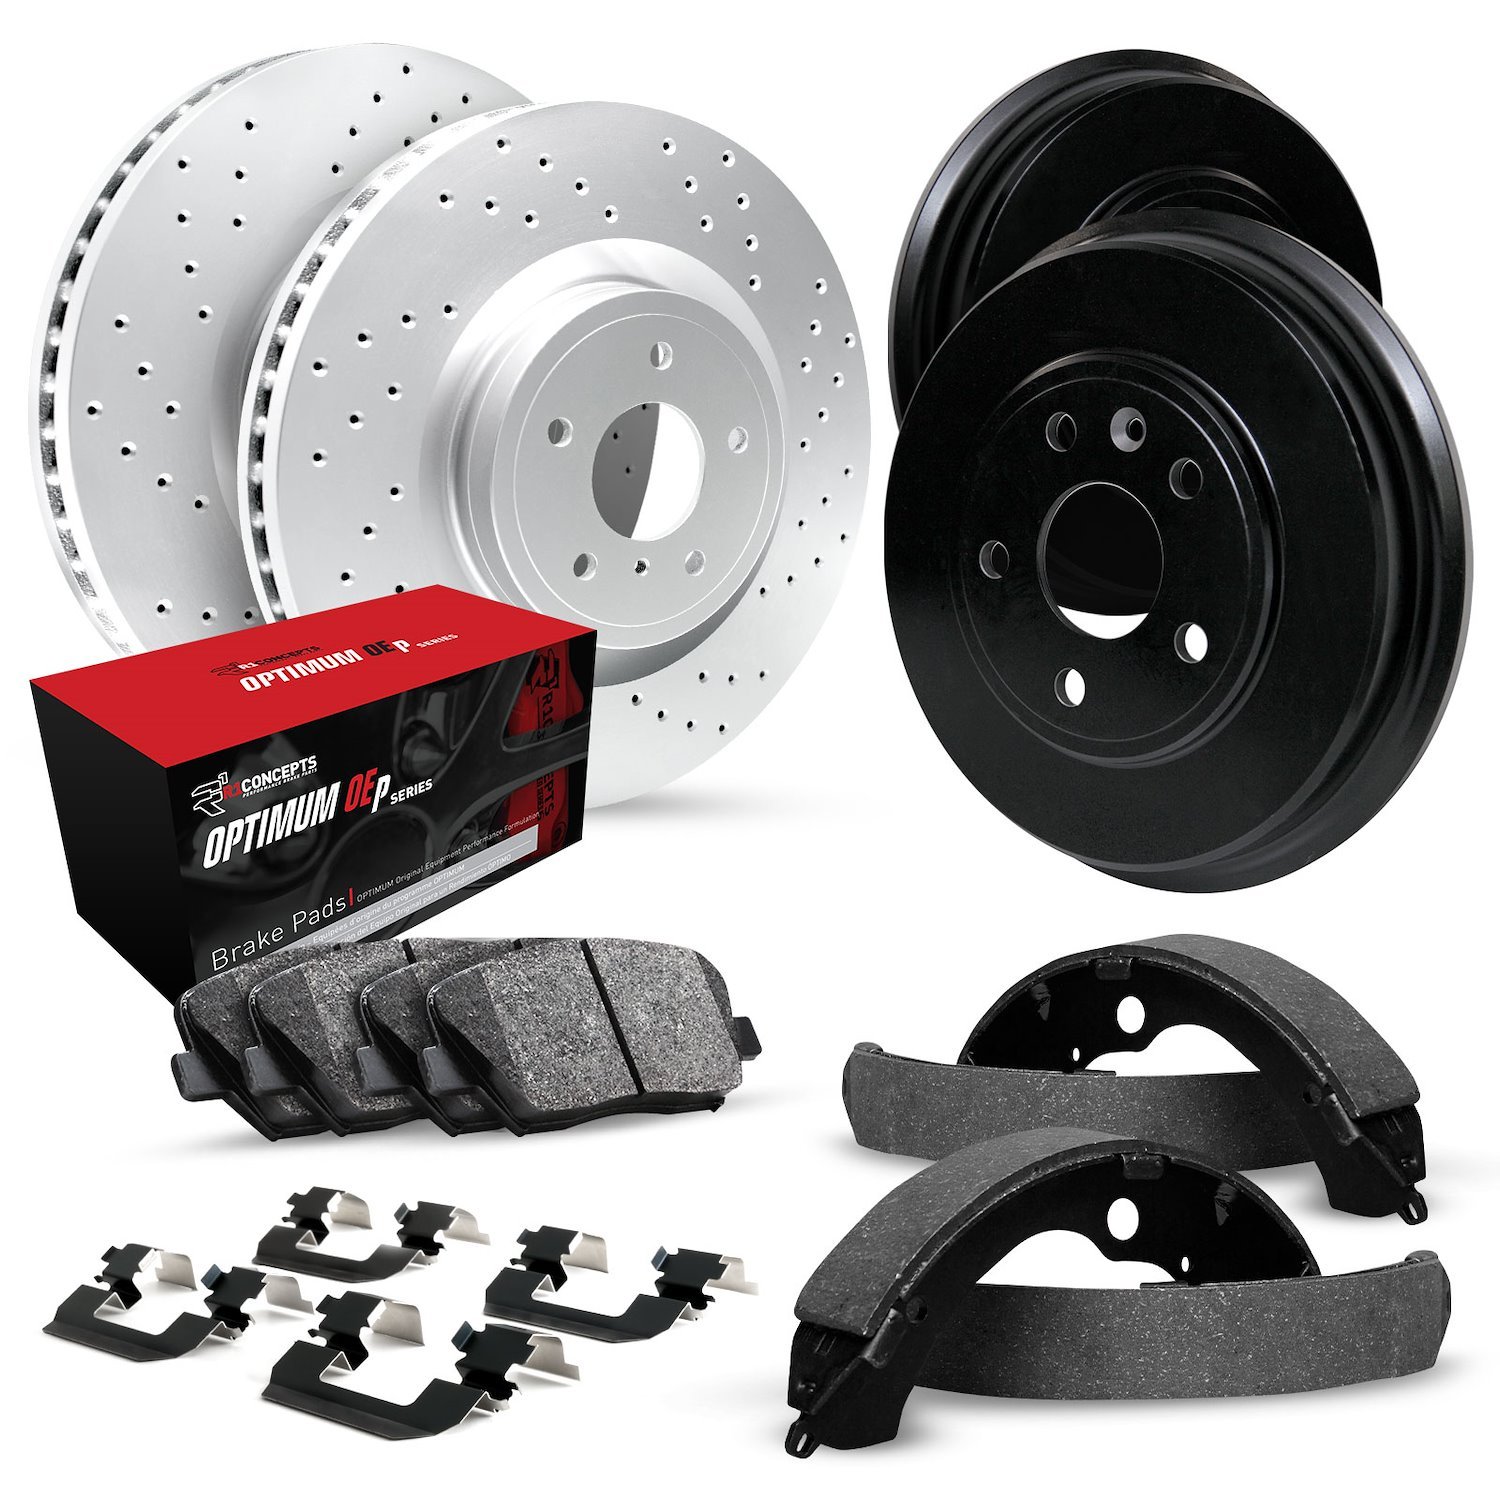 GEO-Carbon Drilled Brake Rotor & Drum Set w/Optimum OE Pads, Shoes, & Hardware, 1971-1974 GM, Position: Front & Rear